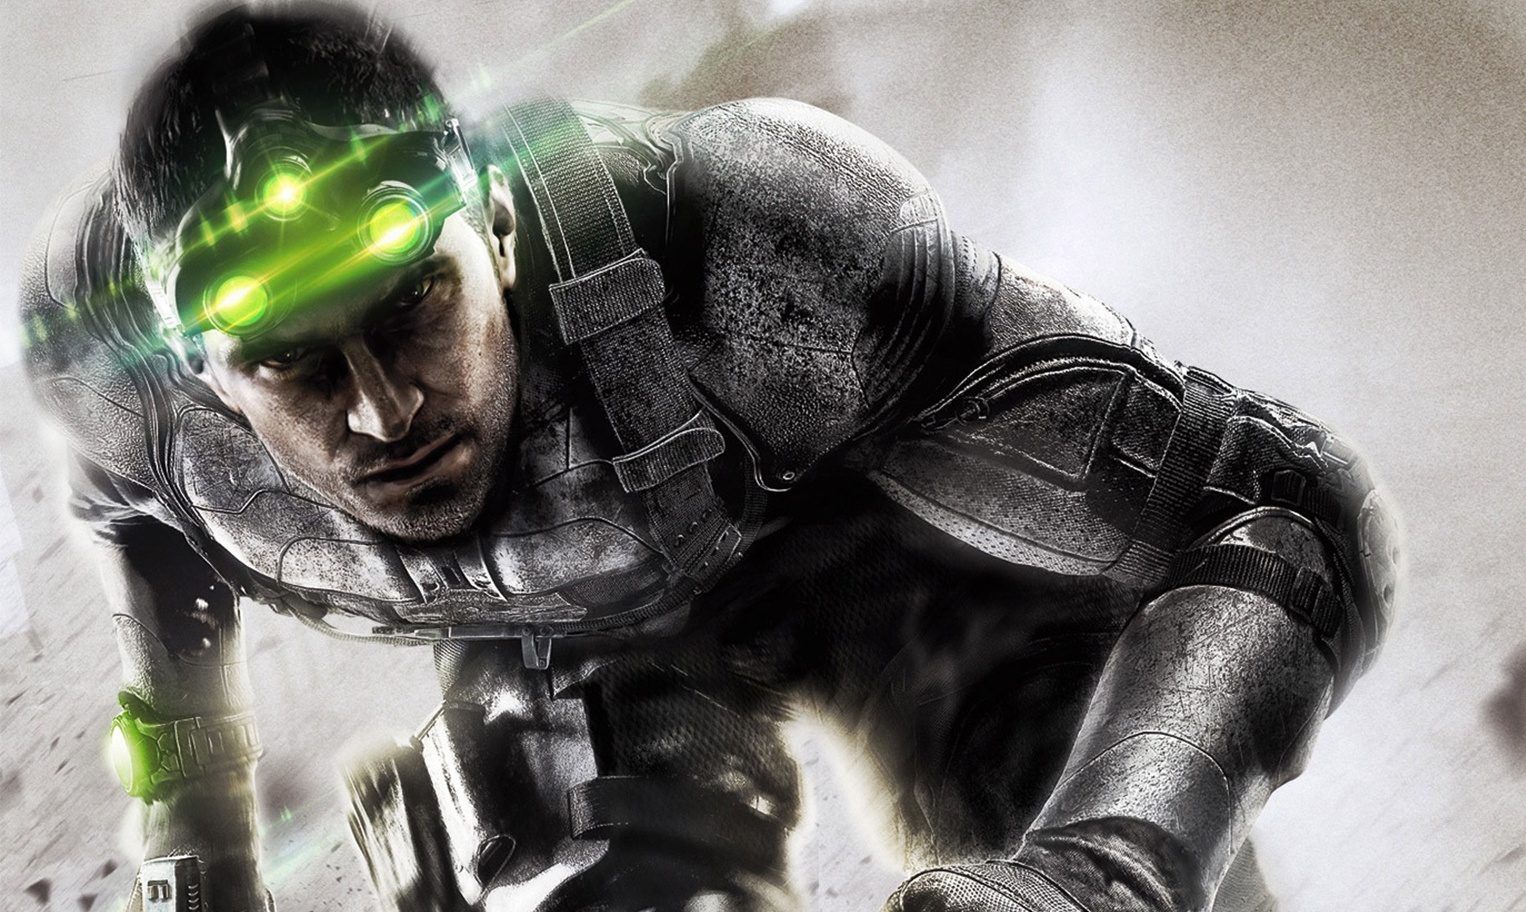 splinter cell new game coming